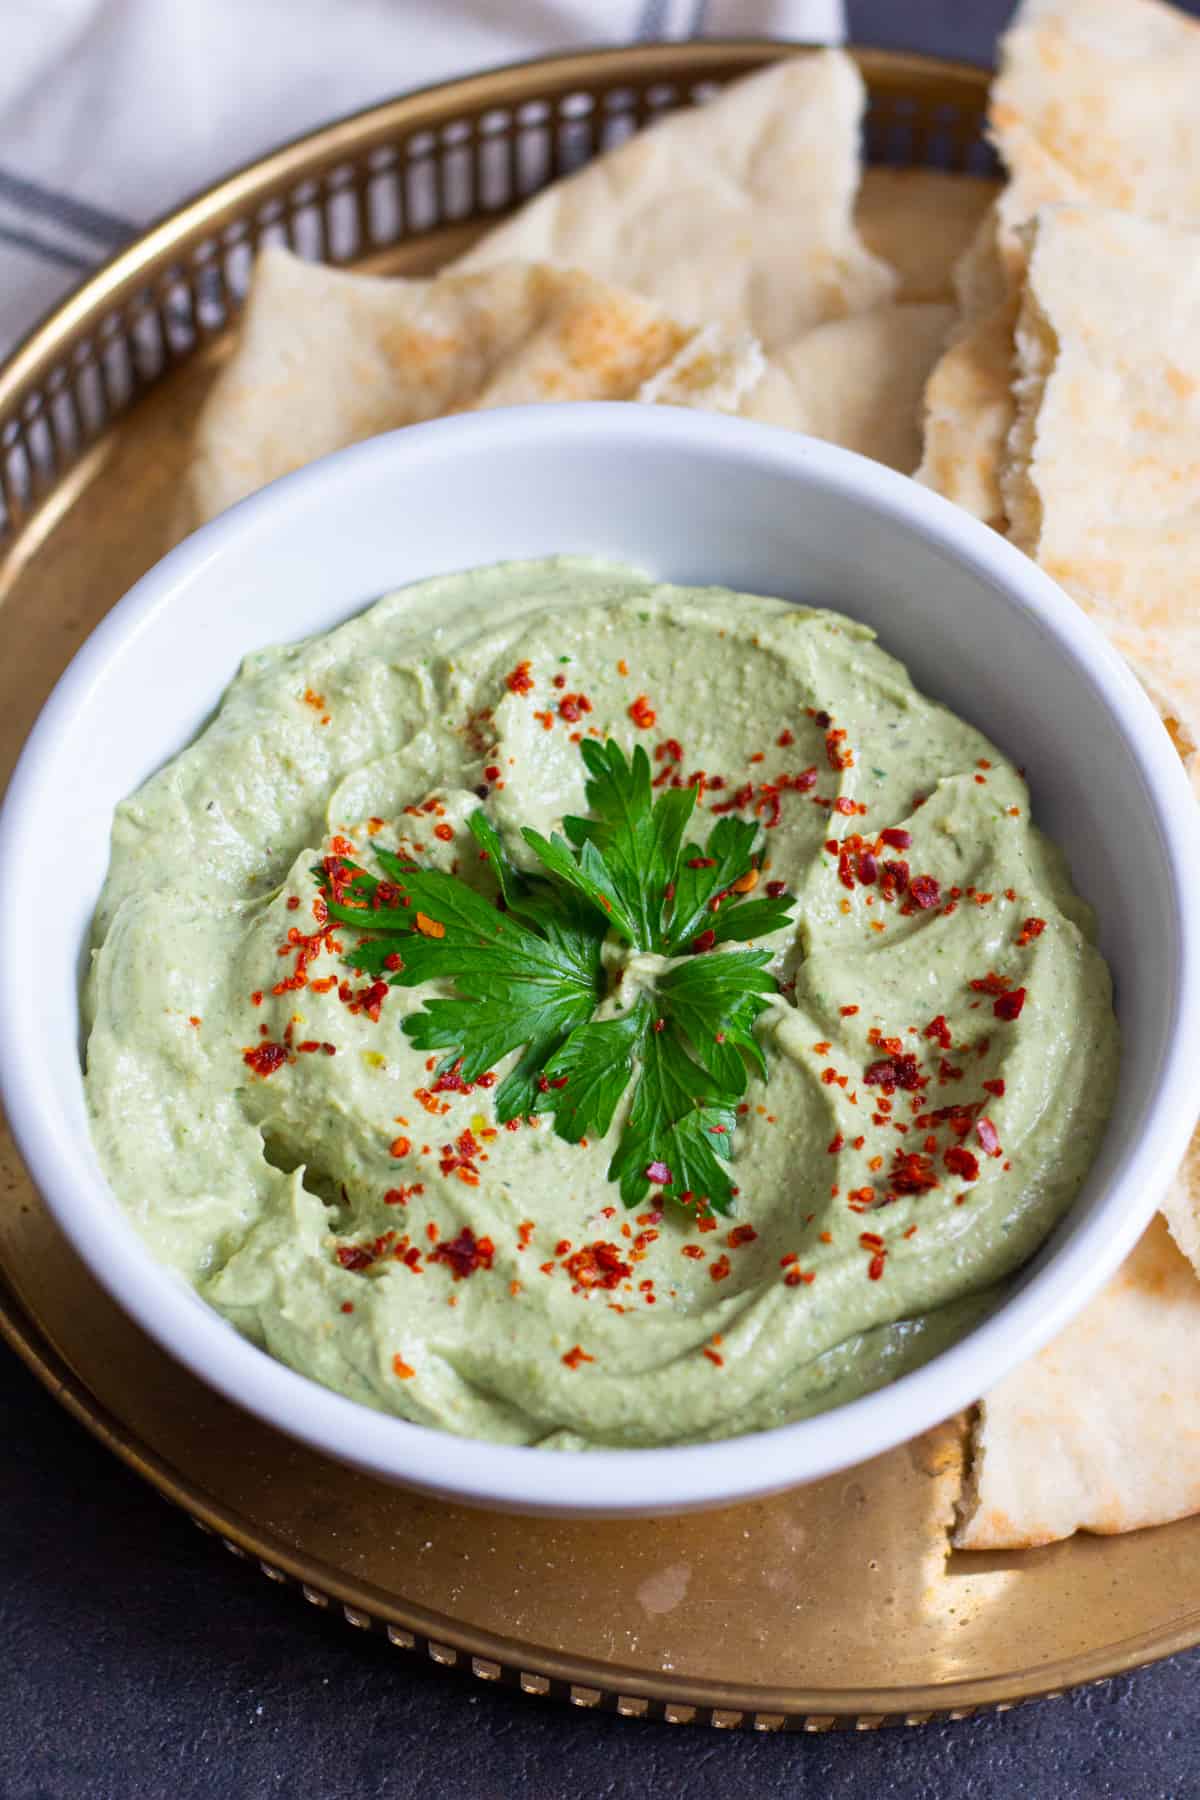 Ready in 15 minutes, this avocado dip with walnuts and pistachios is a great addition to your appetizer platter. You can serve it alongside some homemade pita bread or crackers.